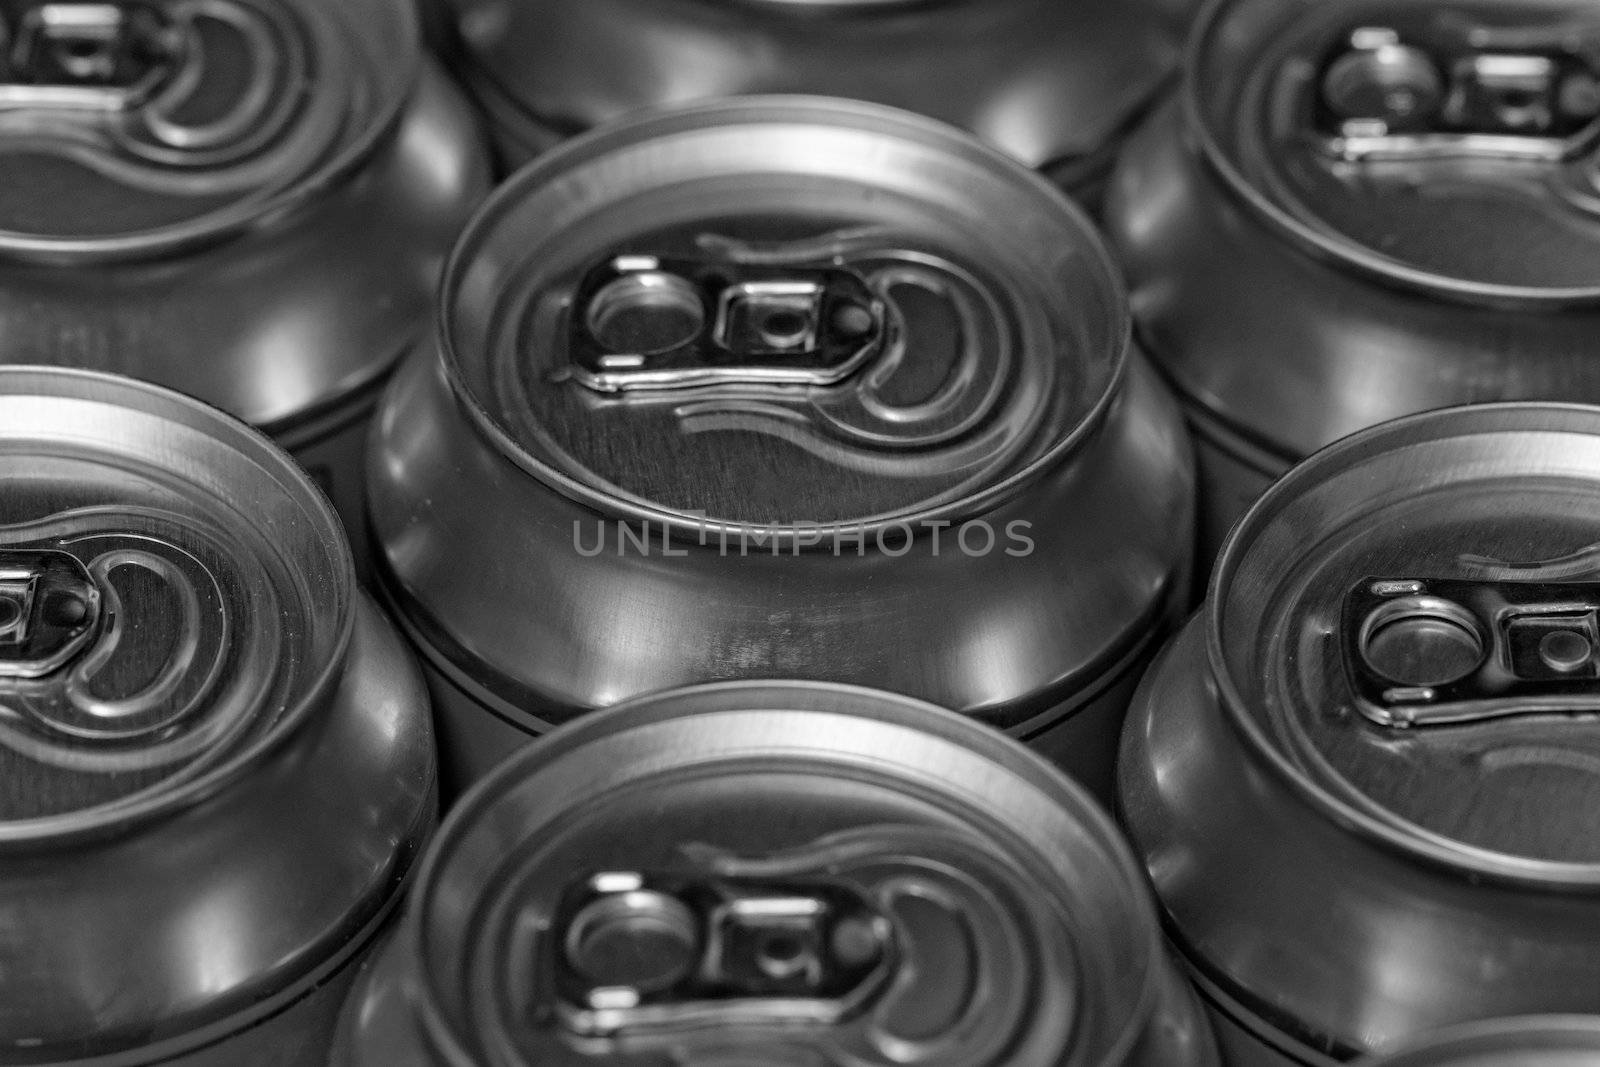 Much of drinking cans by NagyDodo